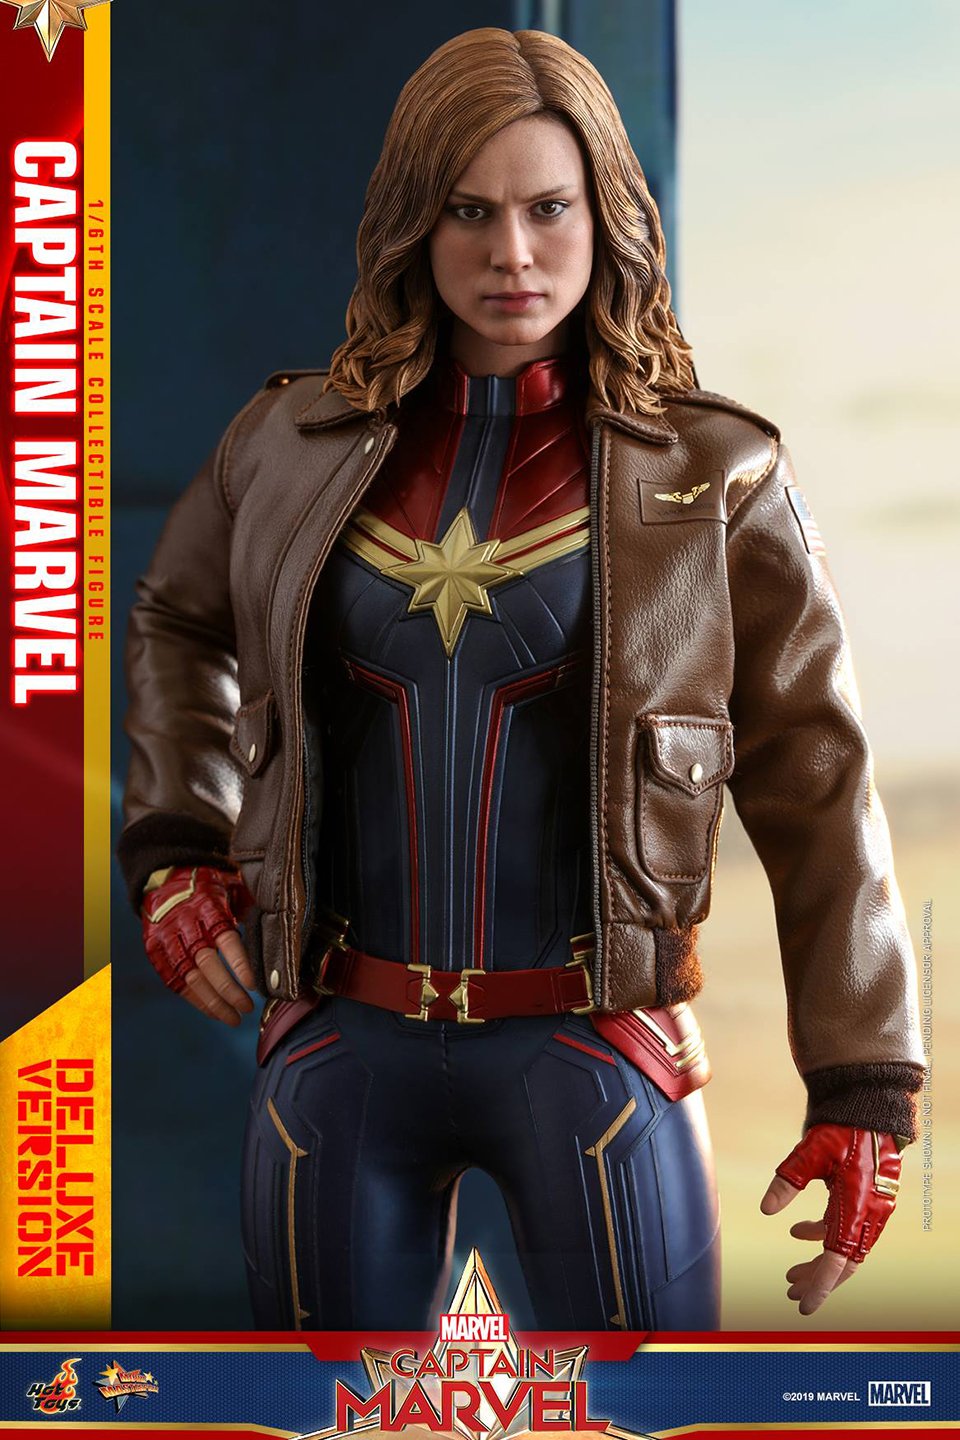 Check out Hot Toys' Action Figure of Brie Larson as